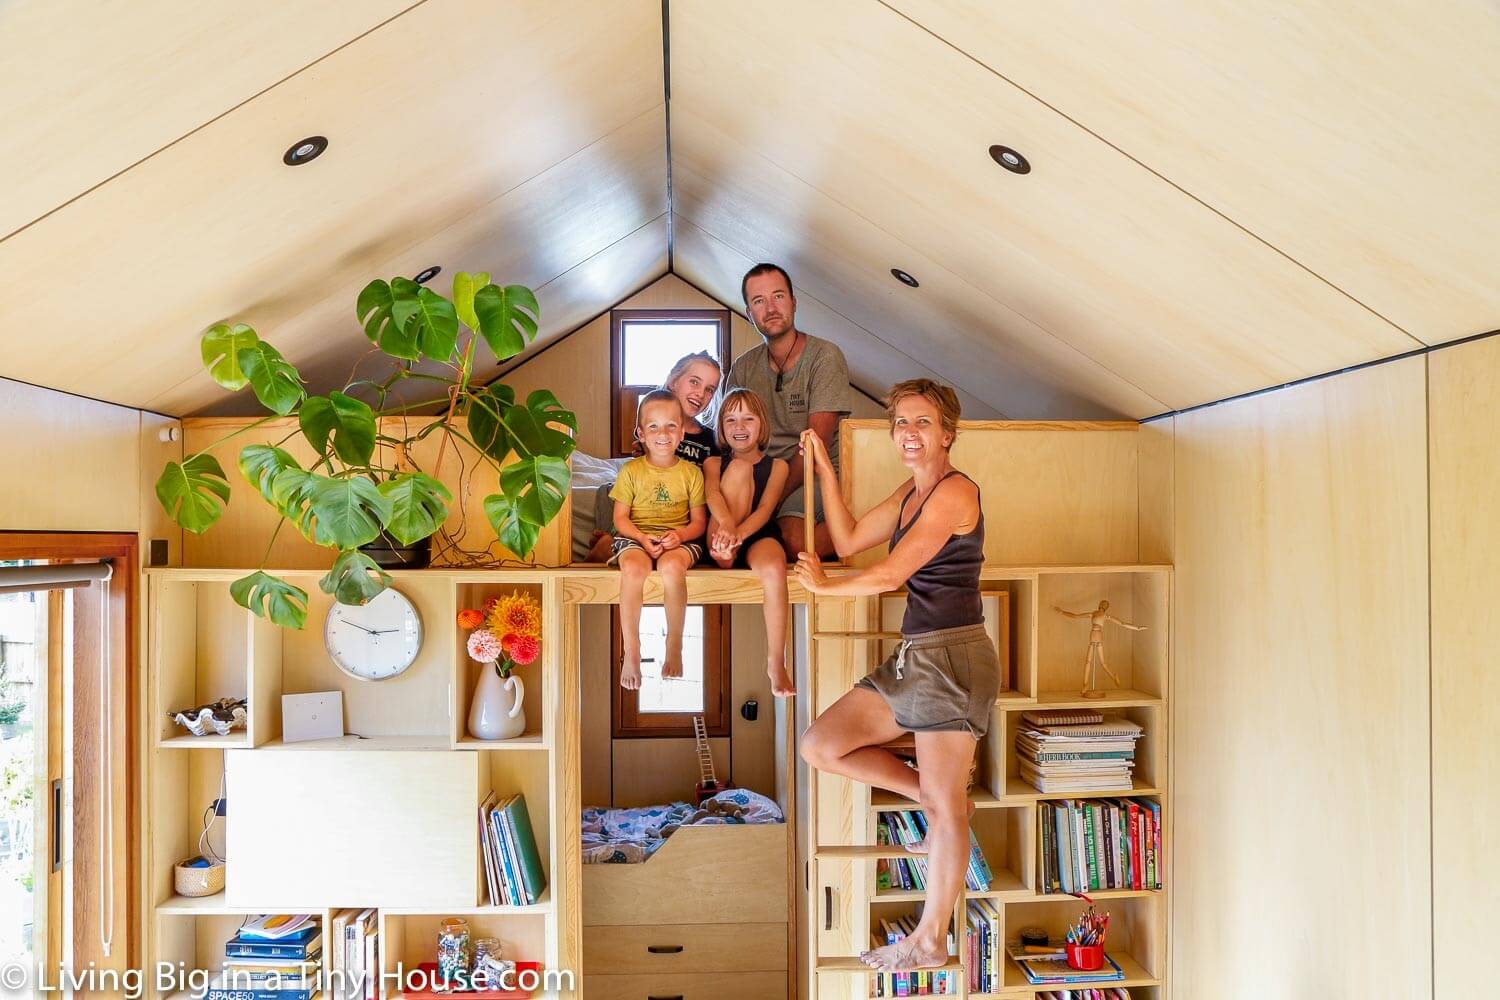  Living  Big in a Tiny  House  Family  of 5 s Modern Tiny  